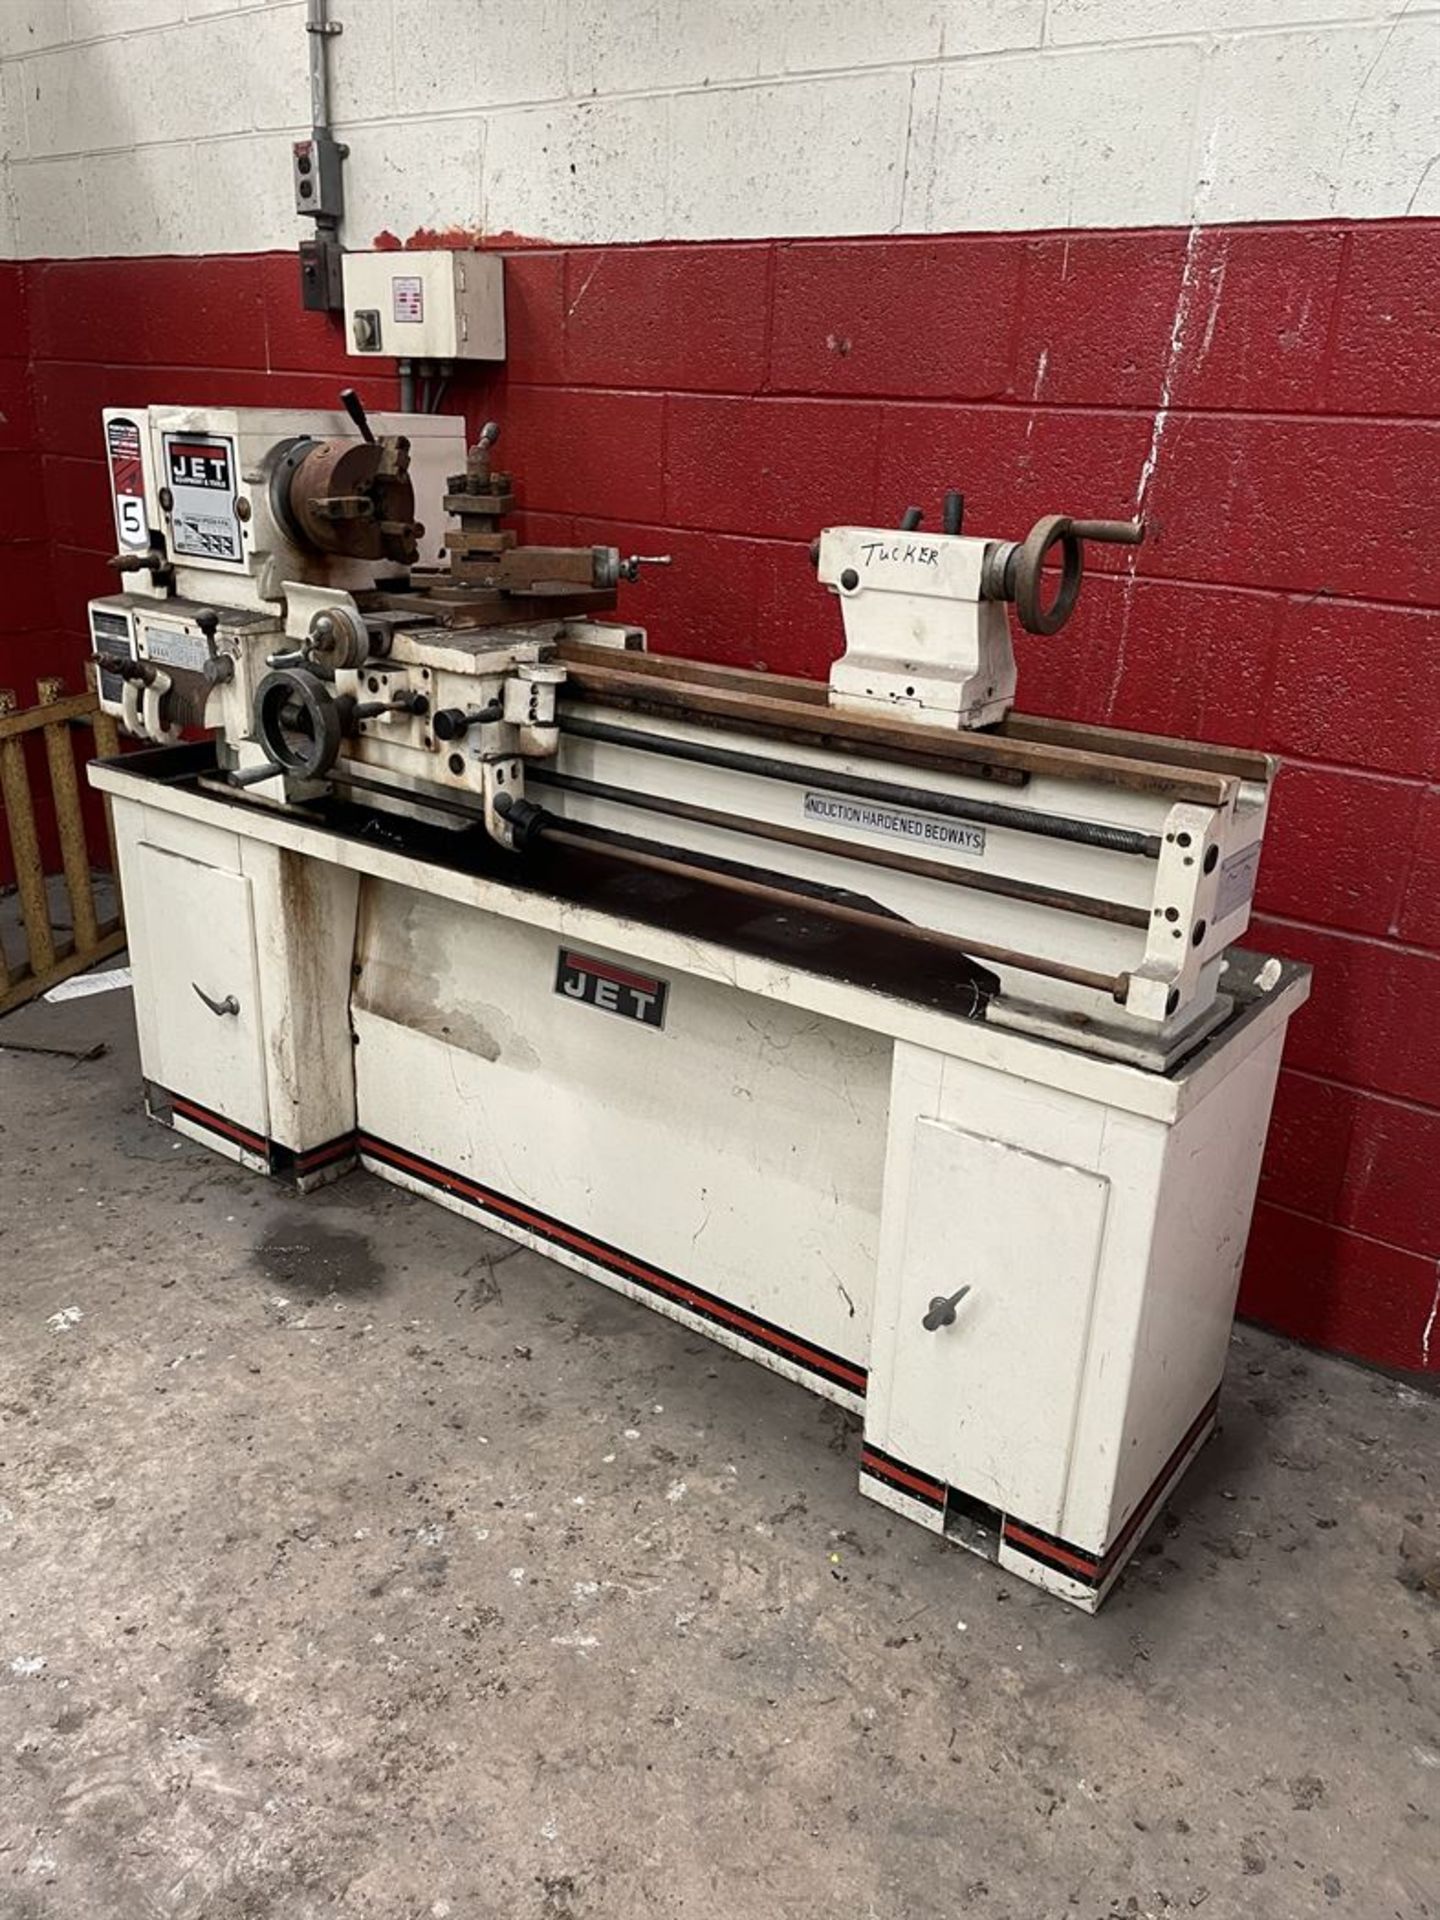 JET BDB-1340 13" x 40" Bench Top Lathe, s/n 80473A08, 13" Swing Over Bed, 40" Distance Between - Image 2 of 3